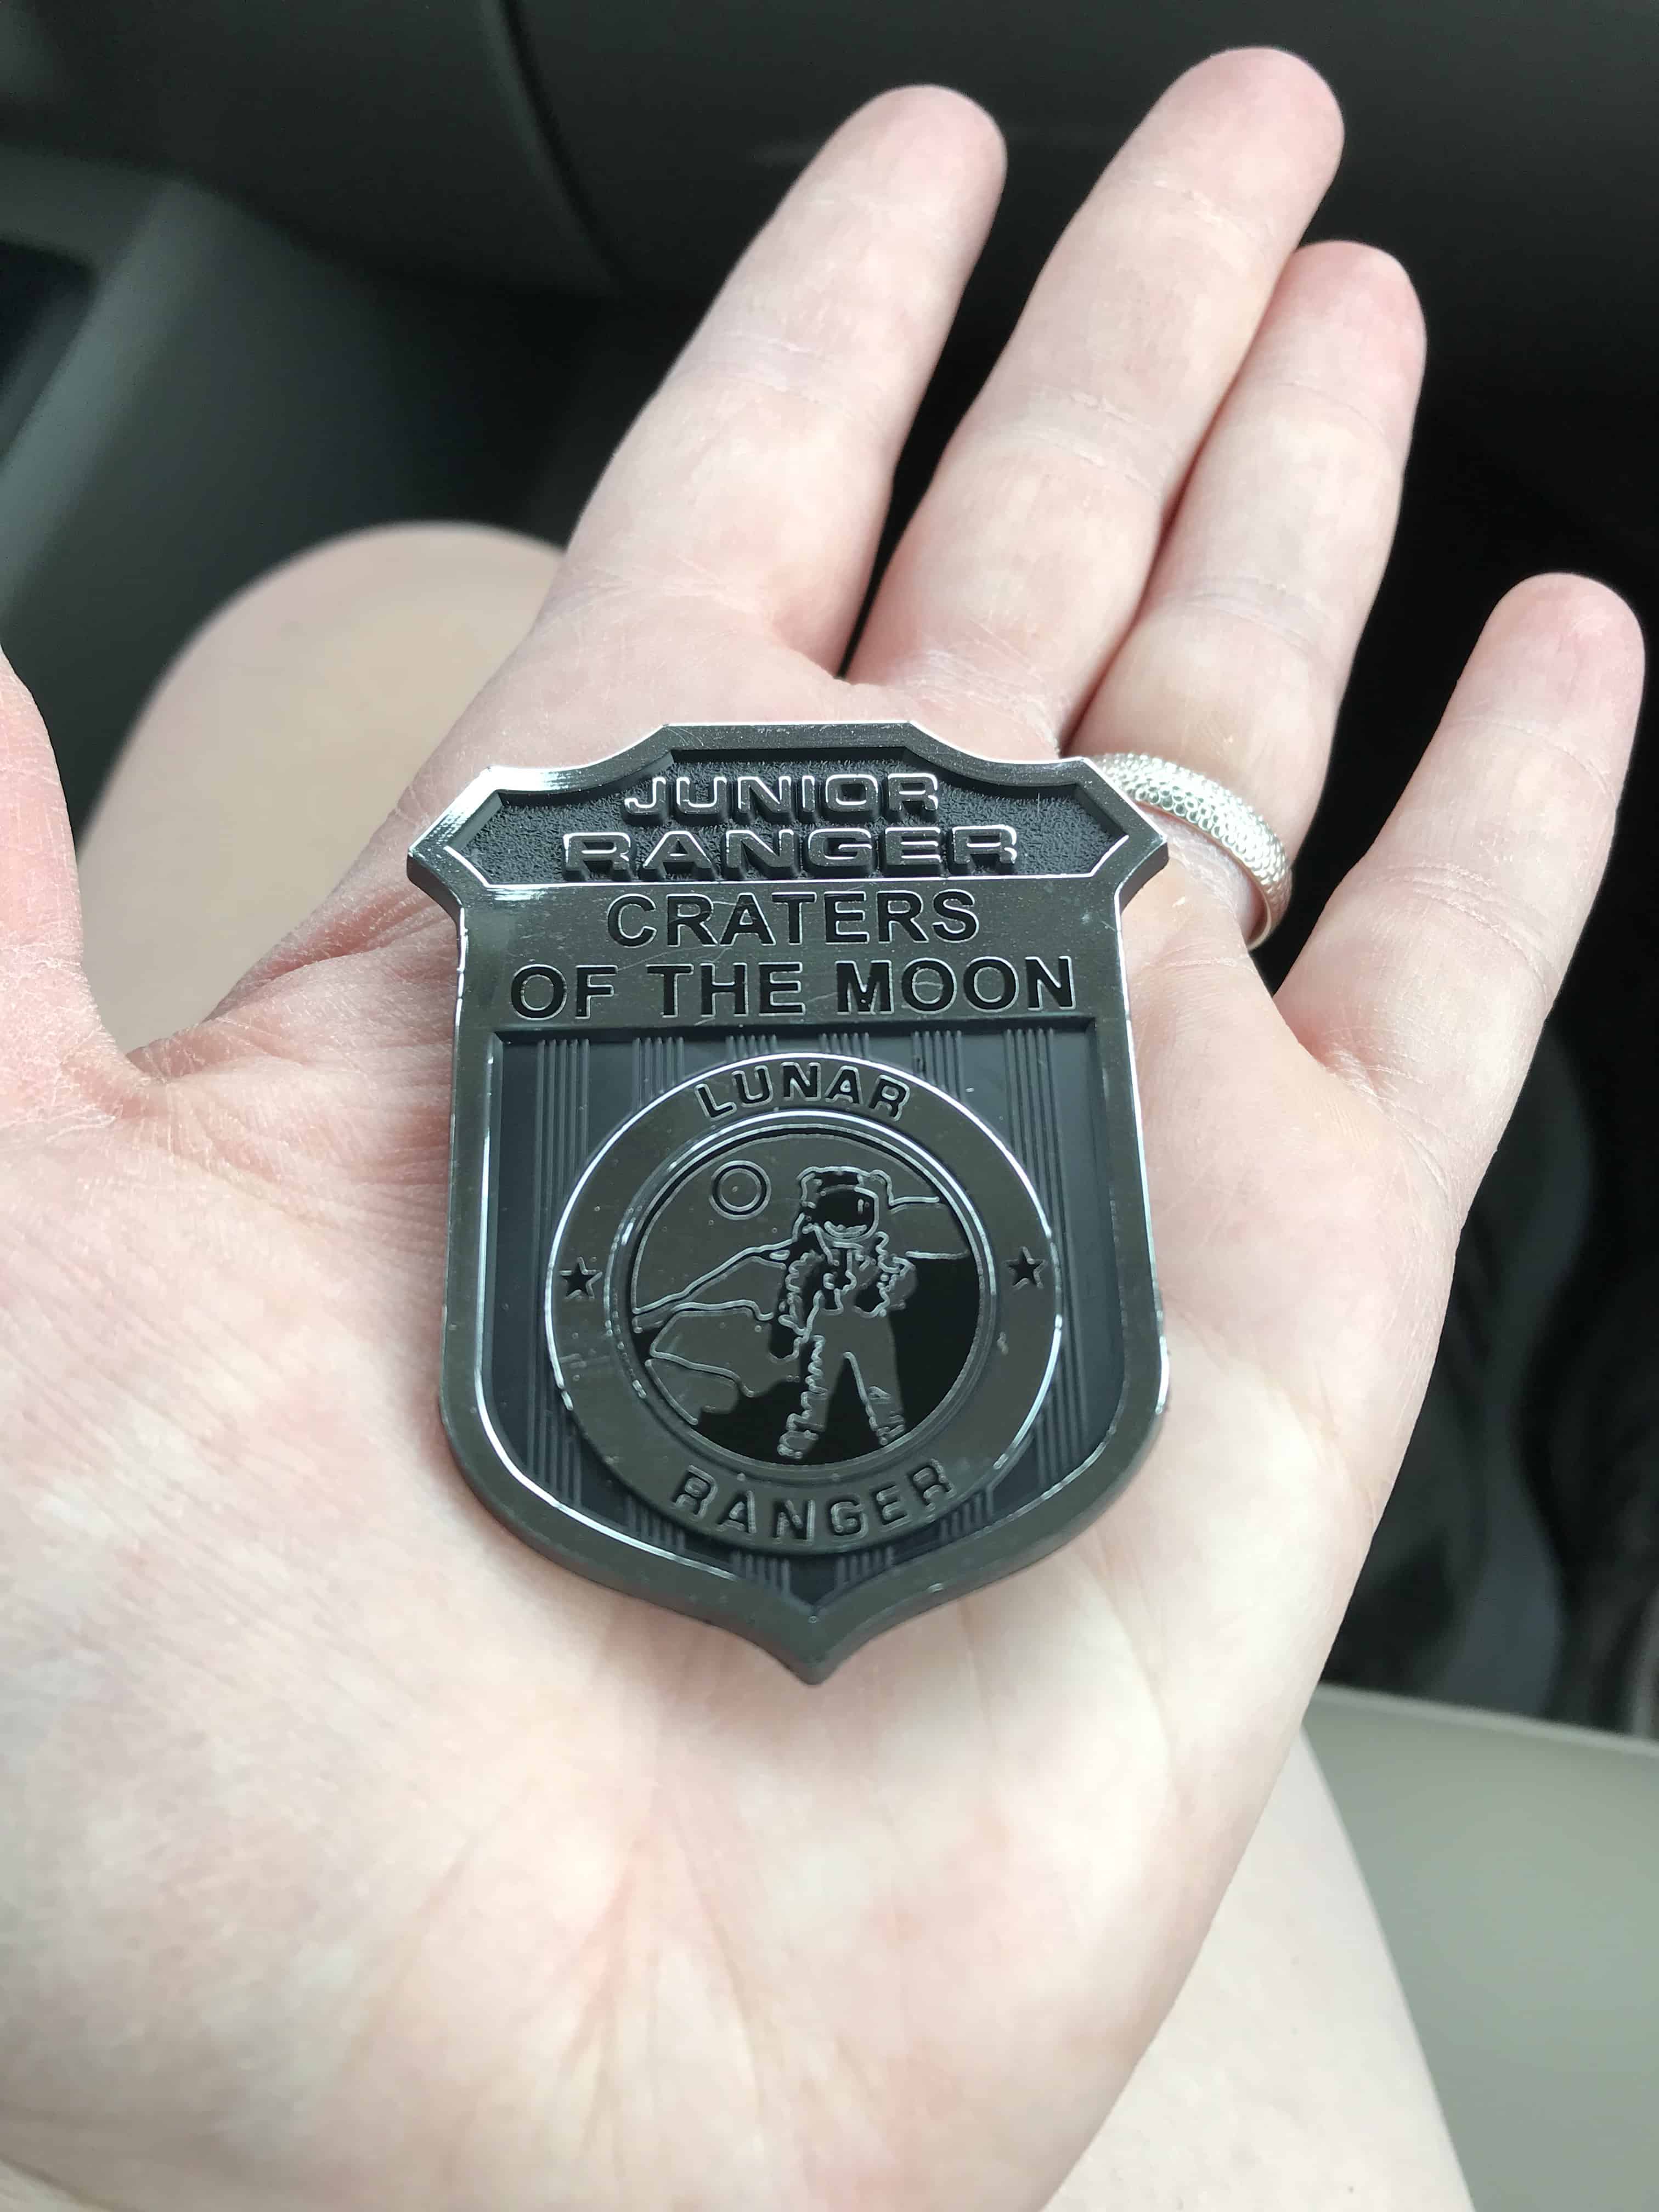 Lunar Ranger badge that we received at craters of the moon Idaho with kids